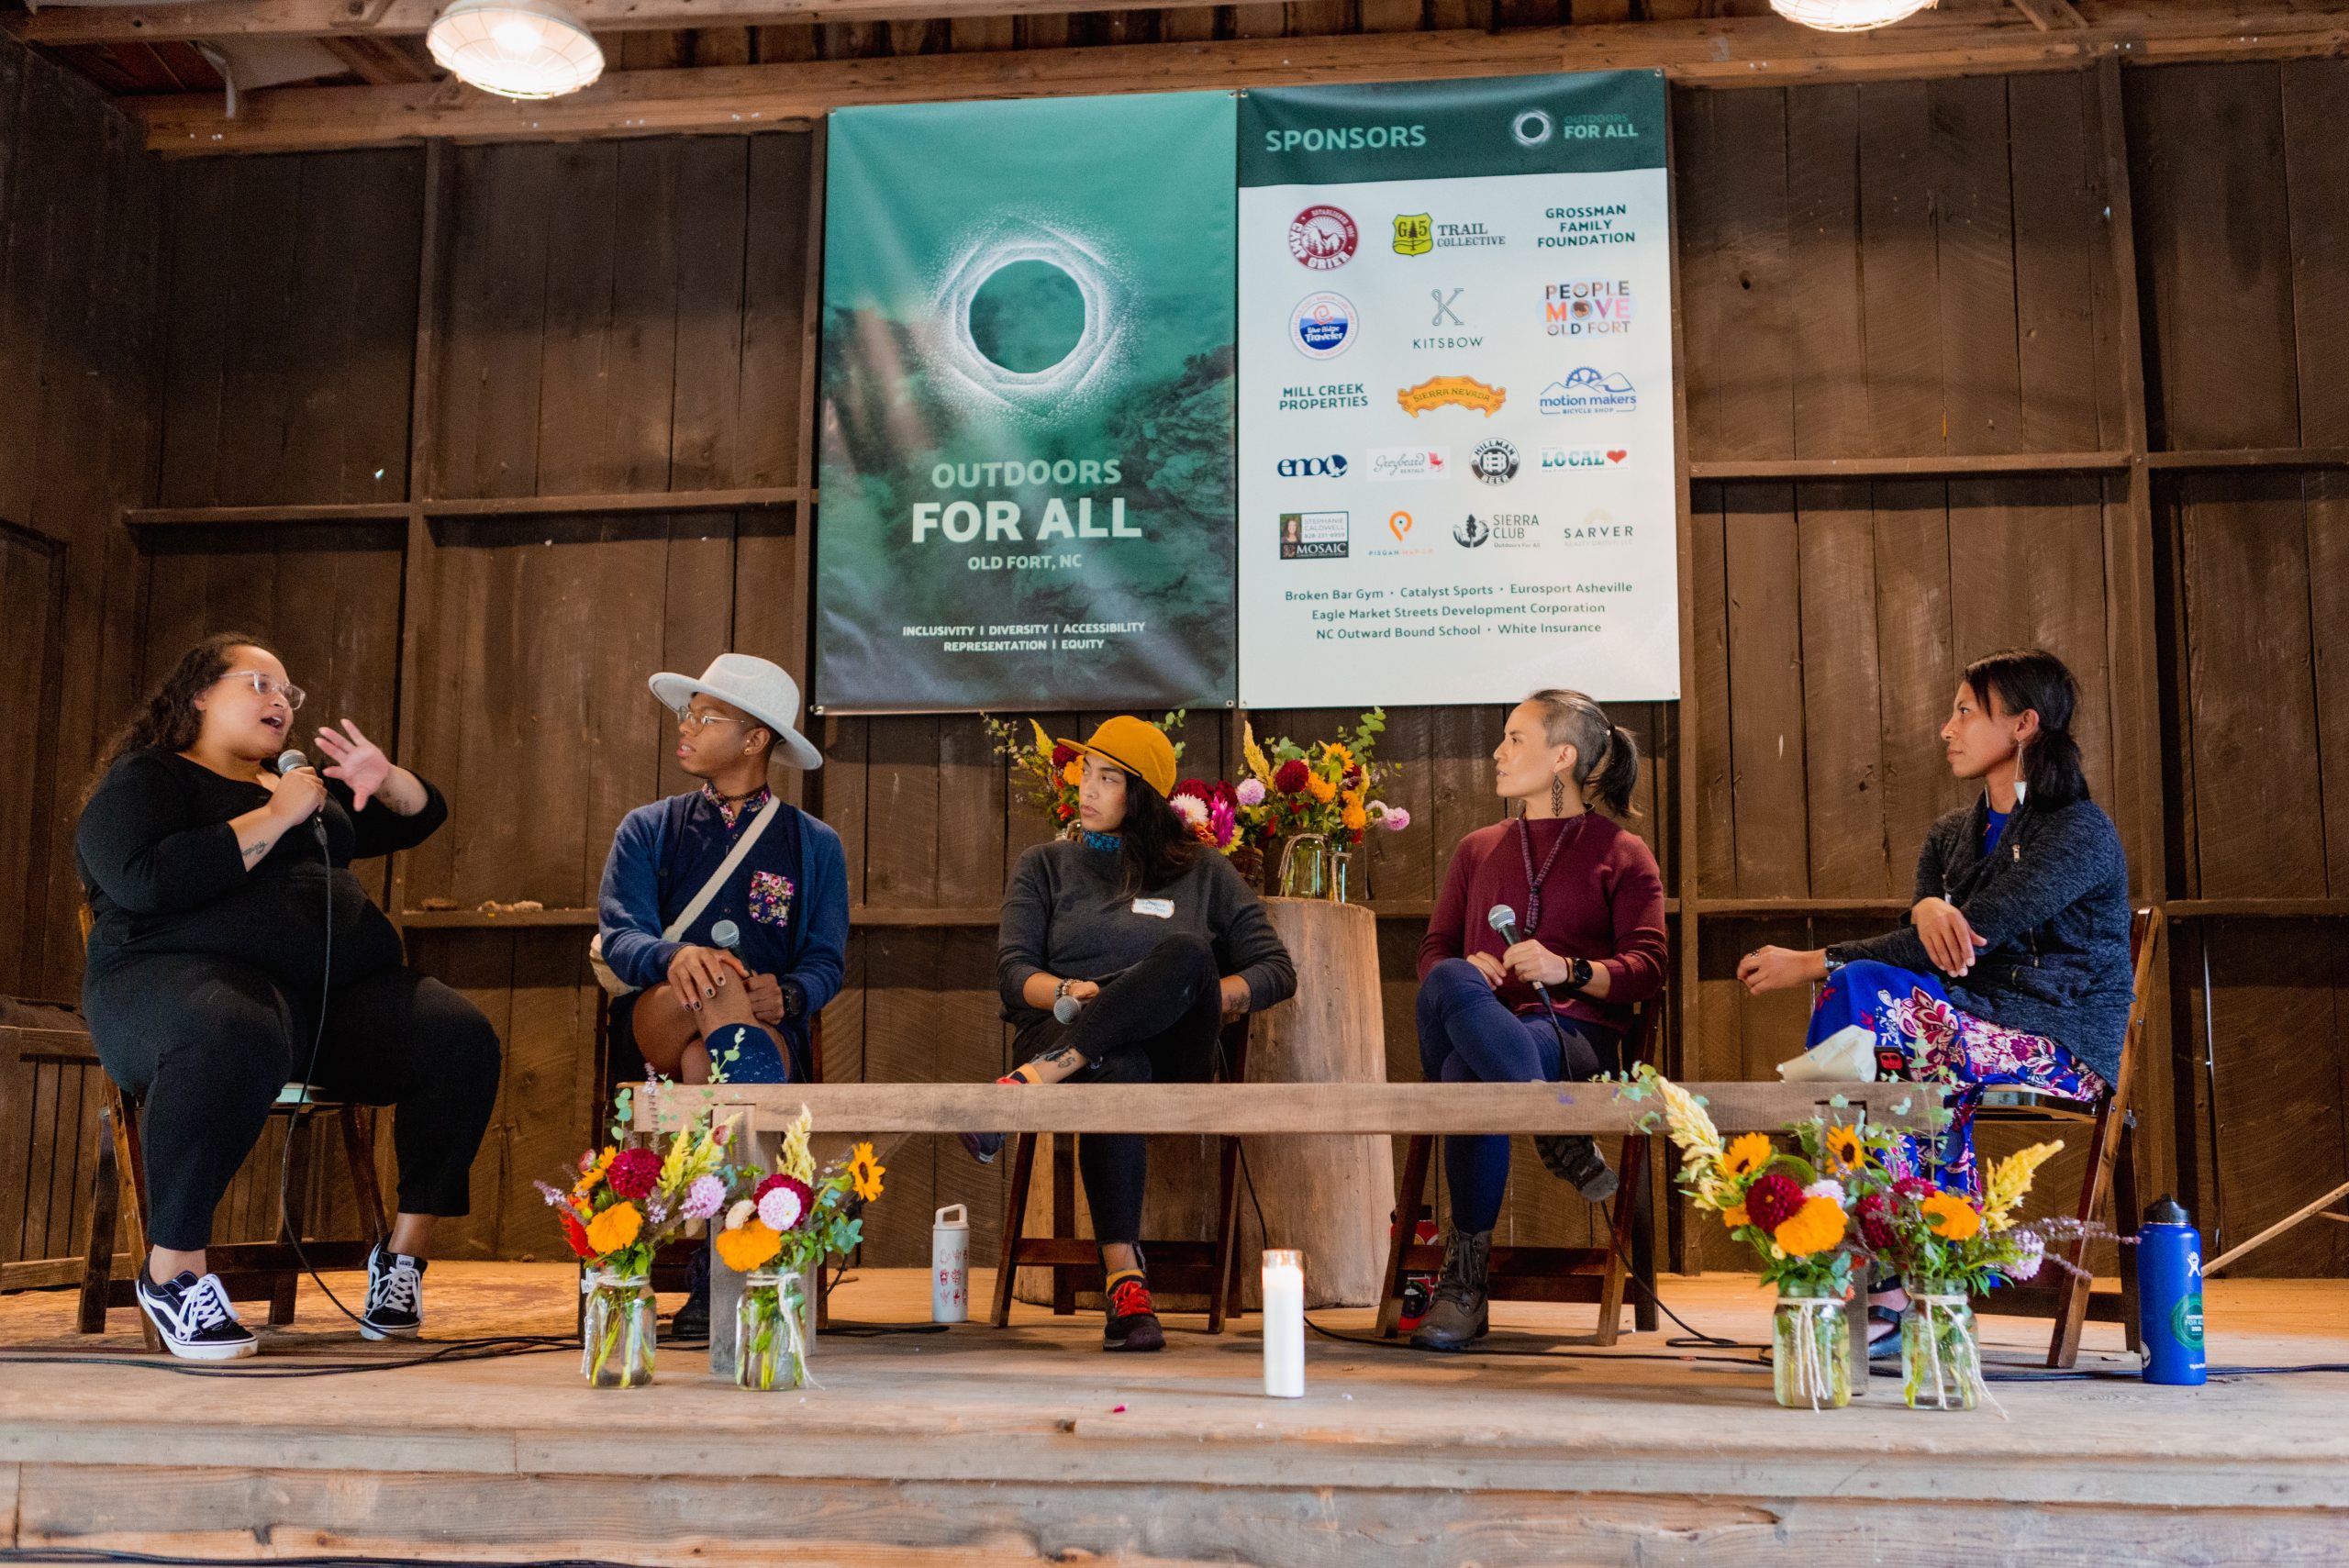 Speakers sit on a stage discussing topics at the "Outdoors for All" Summit.